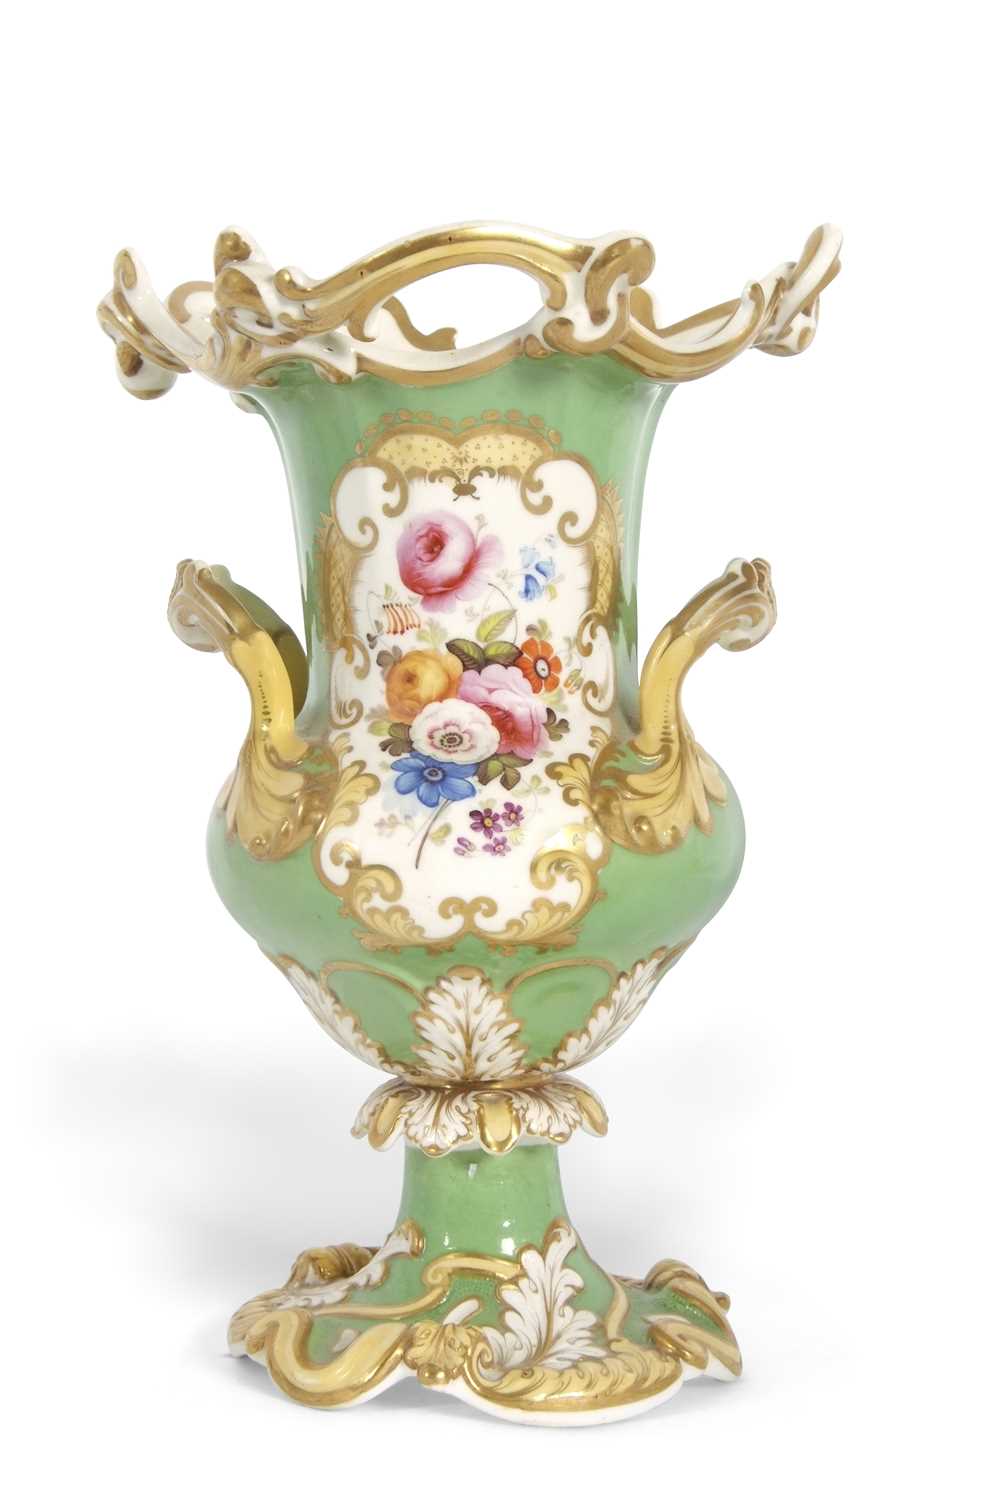 A 19th Century Coalport style vase, the central panel finely painted with floral spray on cream